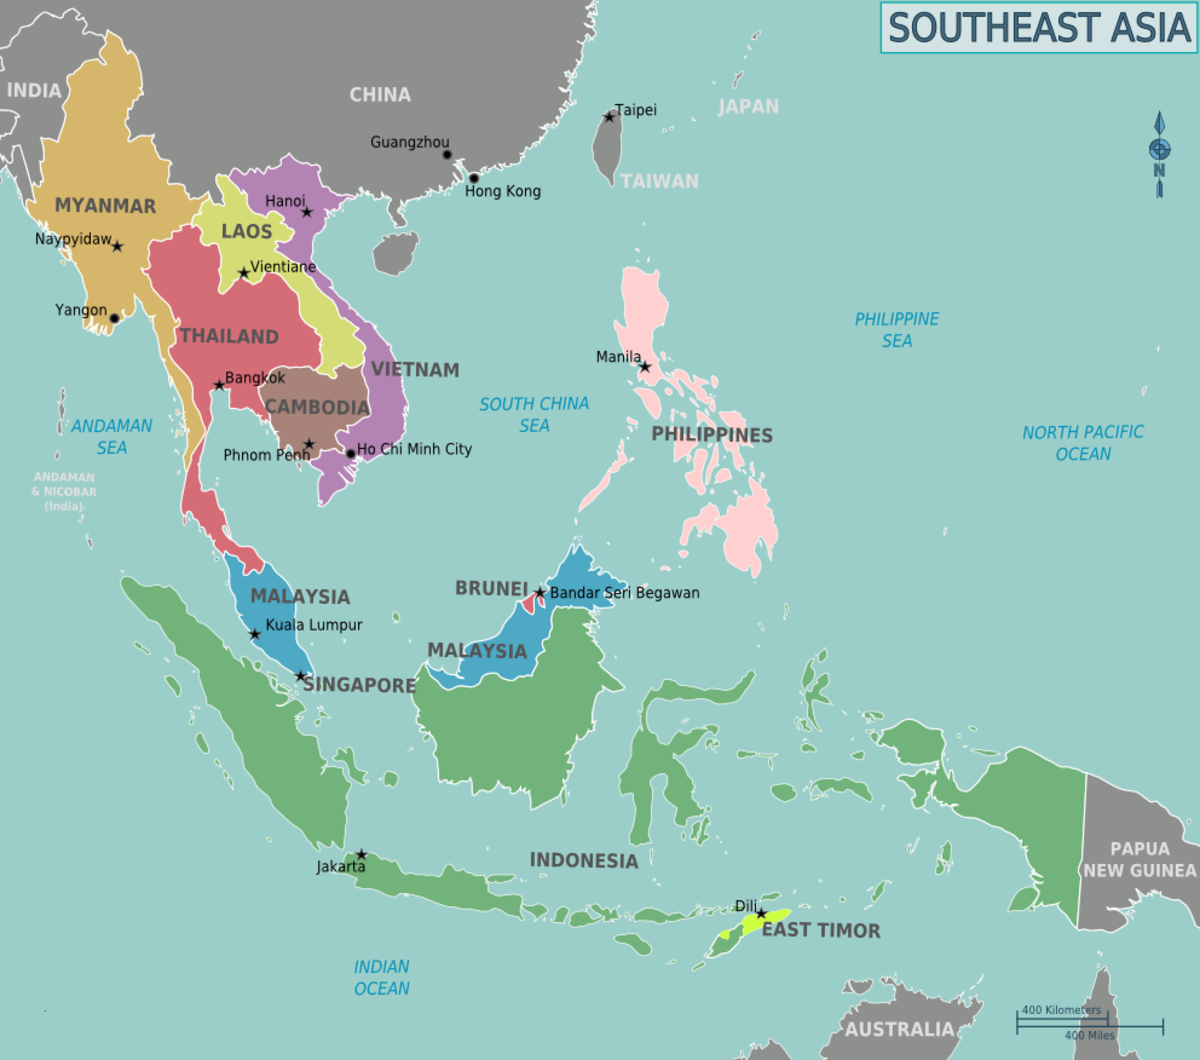 Map of Southeast Asia and its islands